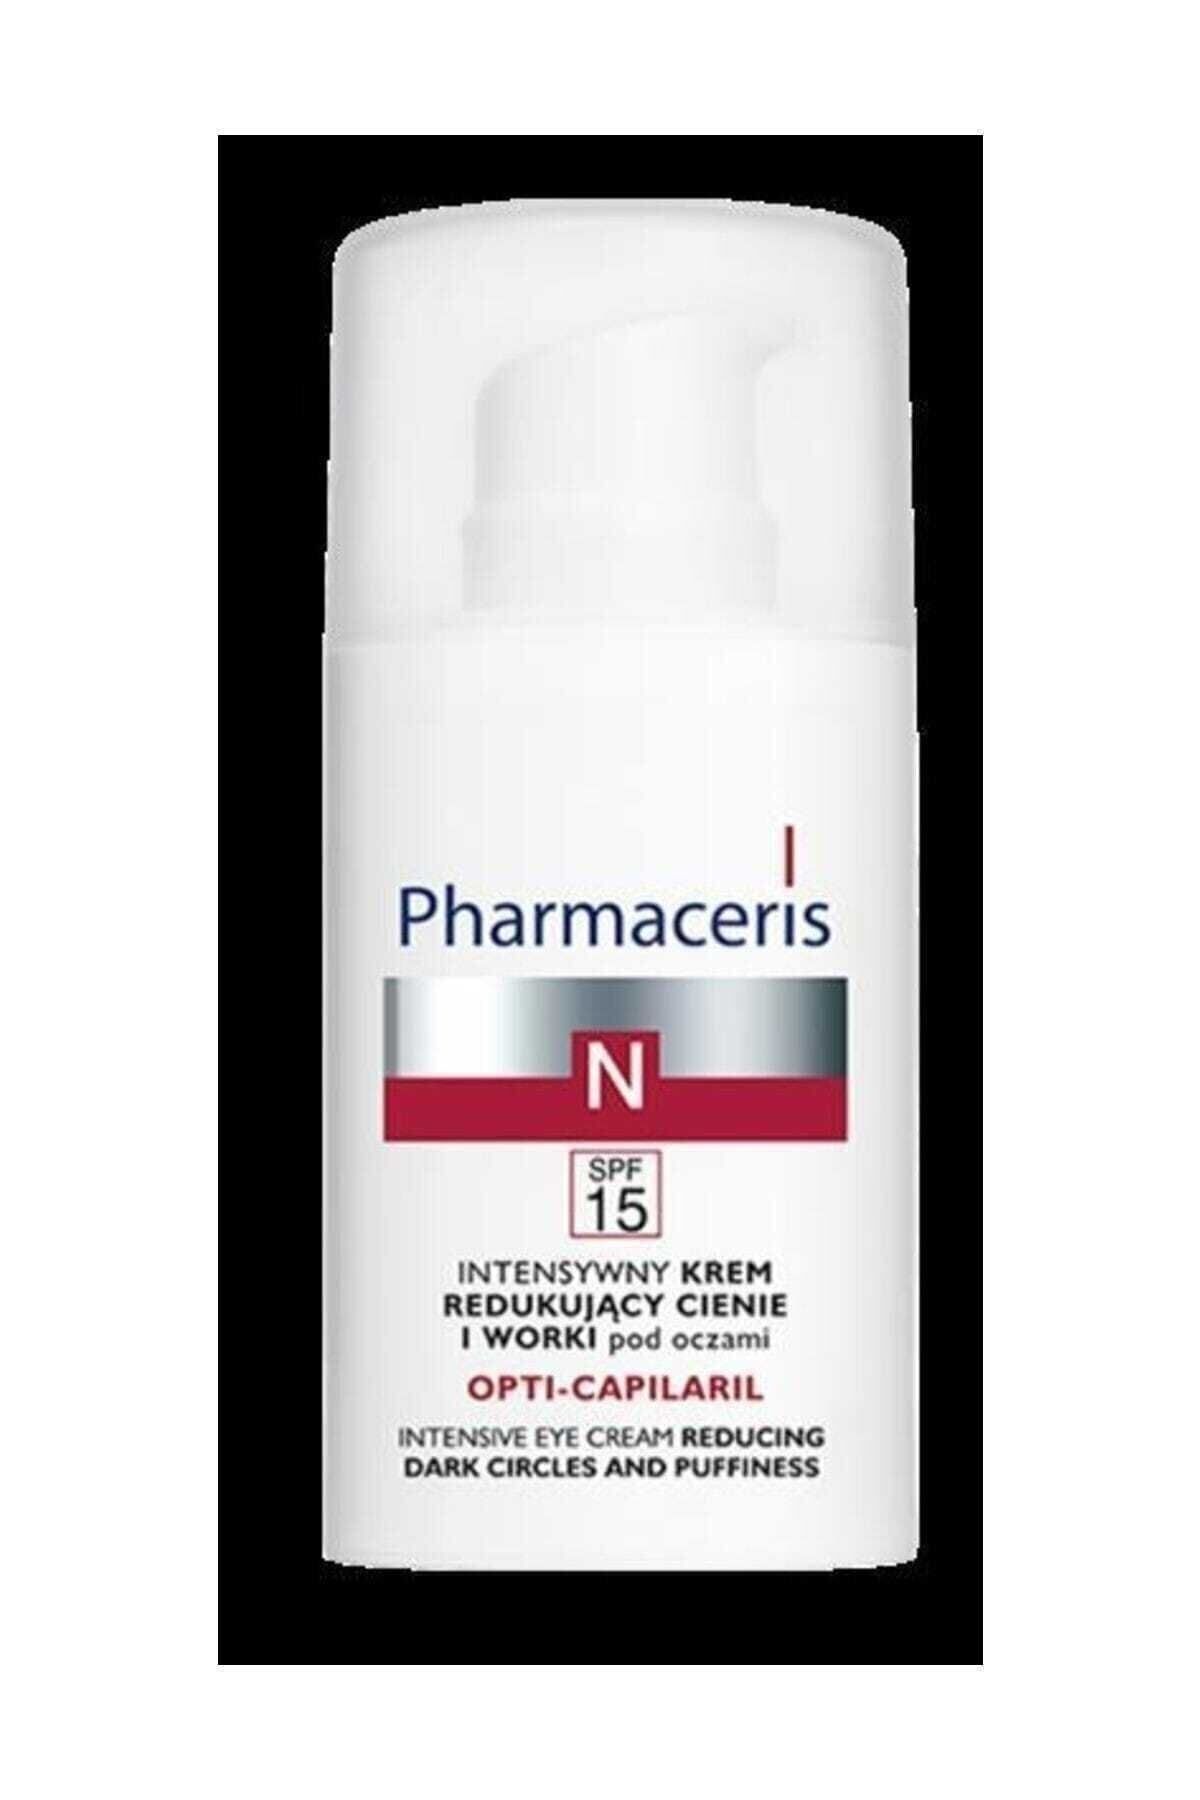 Pharmaceris Dark Circle and Puffiness Relief SPF15 Intensive Intensive Eye Cream 15 ml PSSNS342